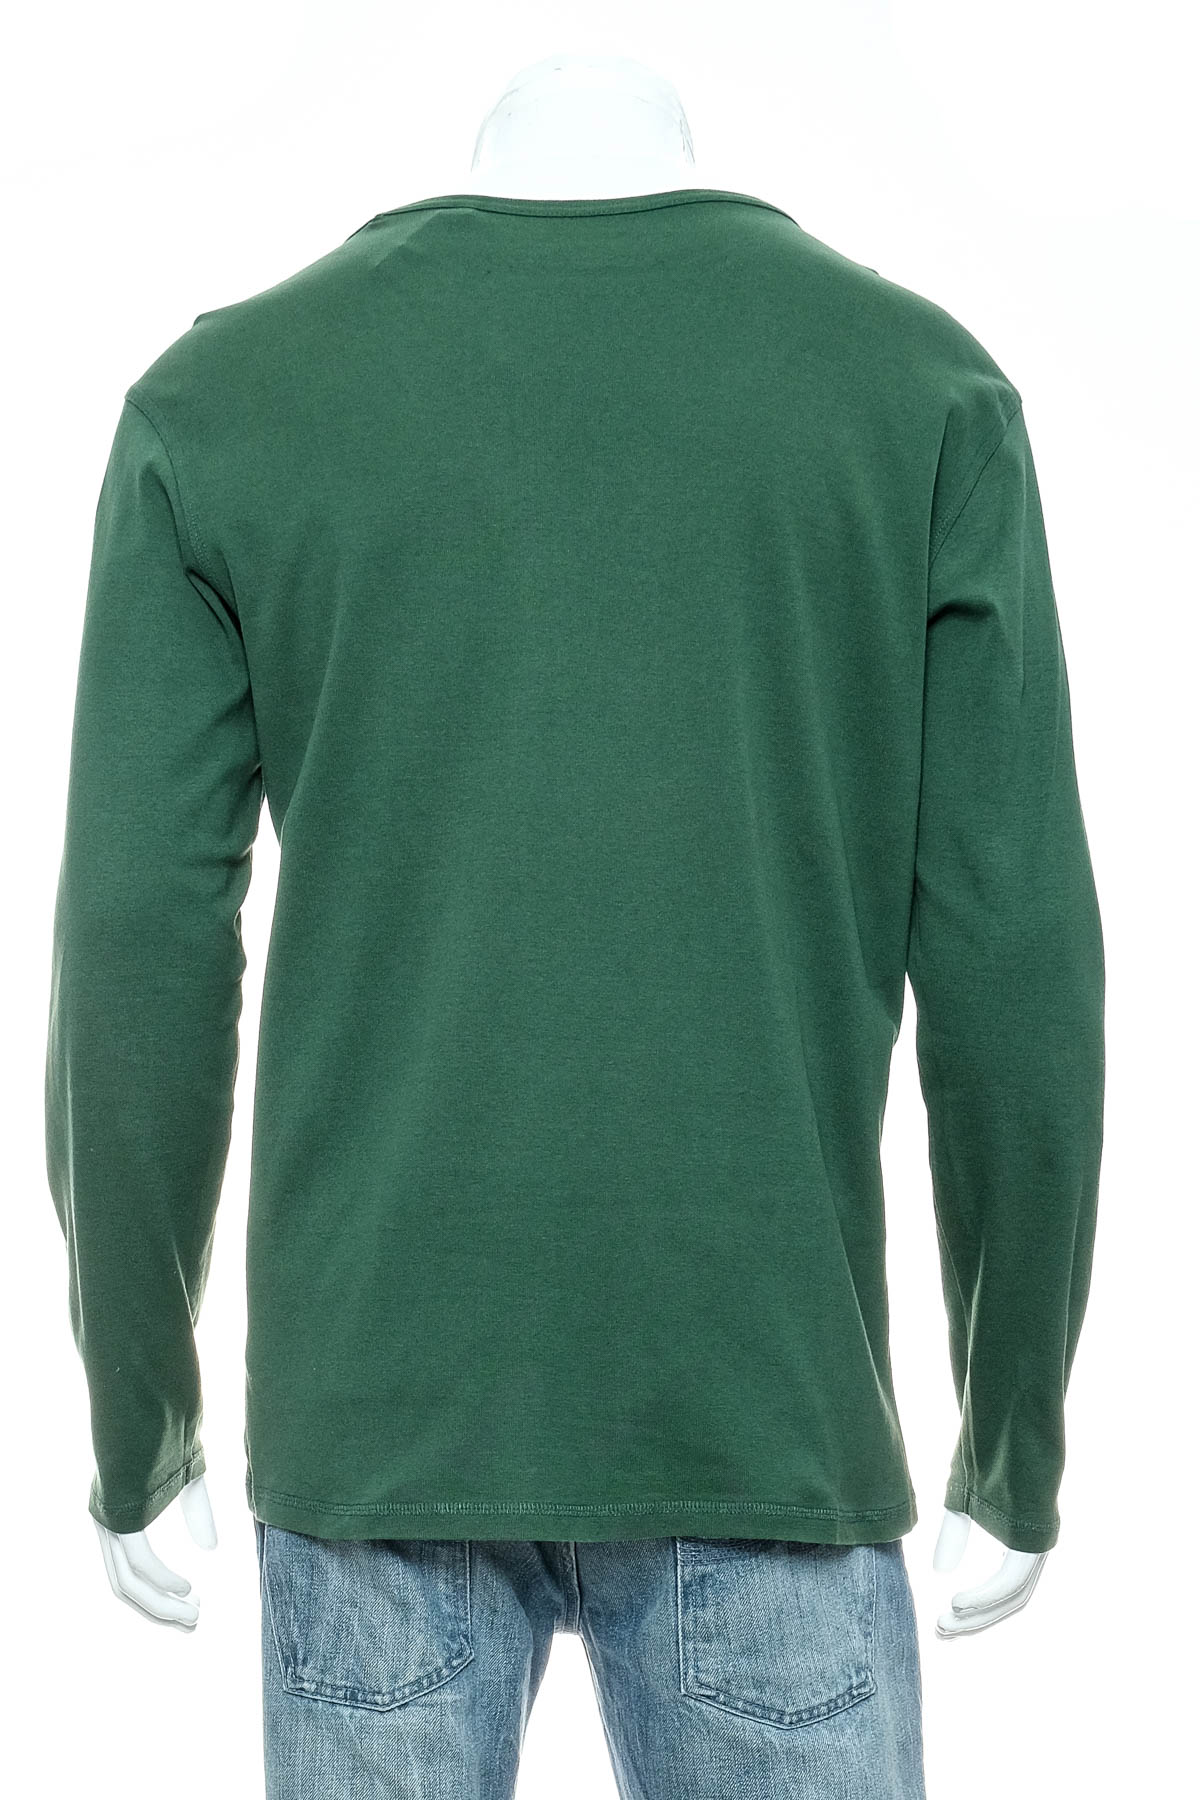 Men's sweater - Southern - 1